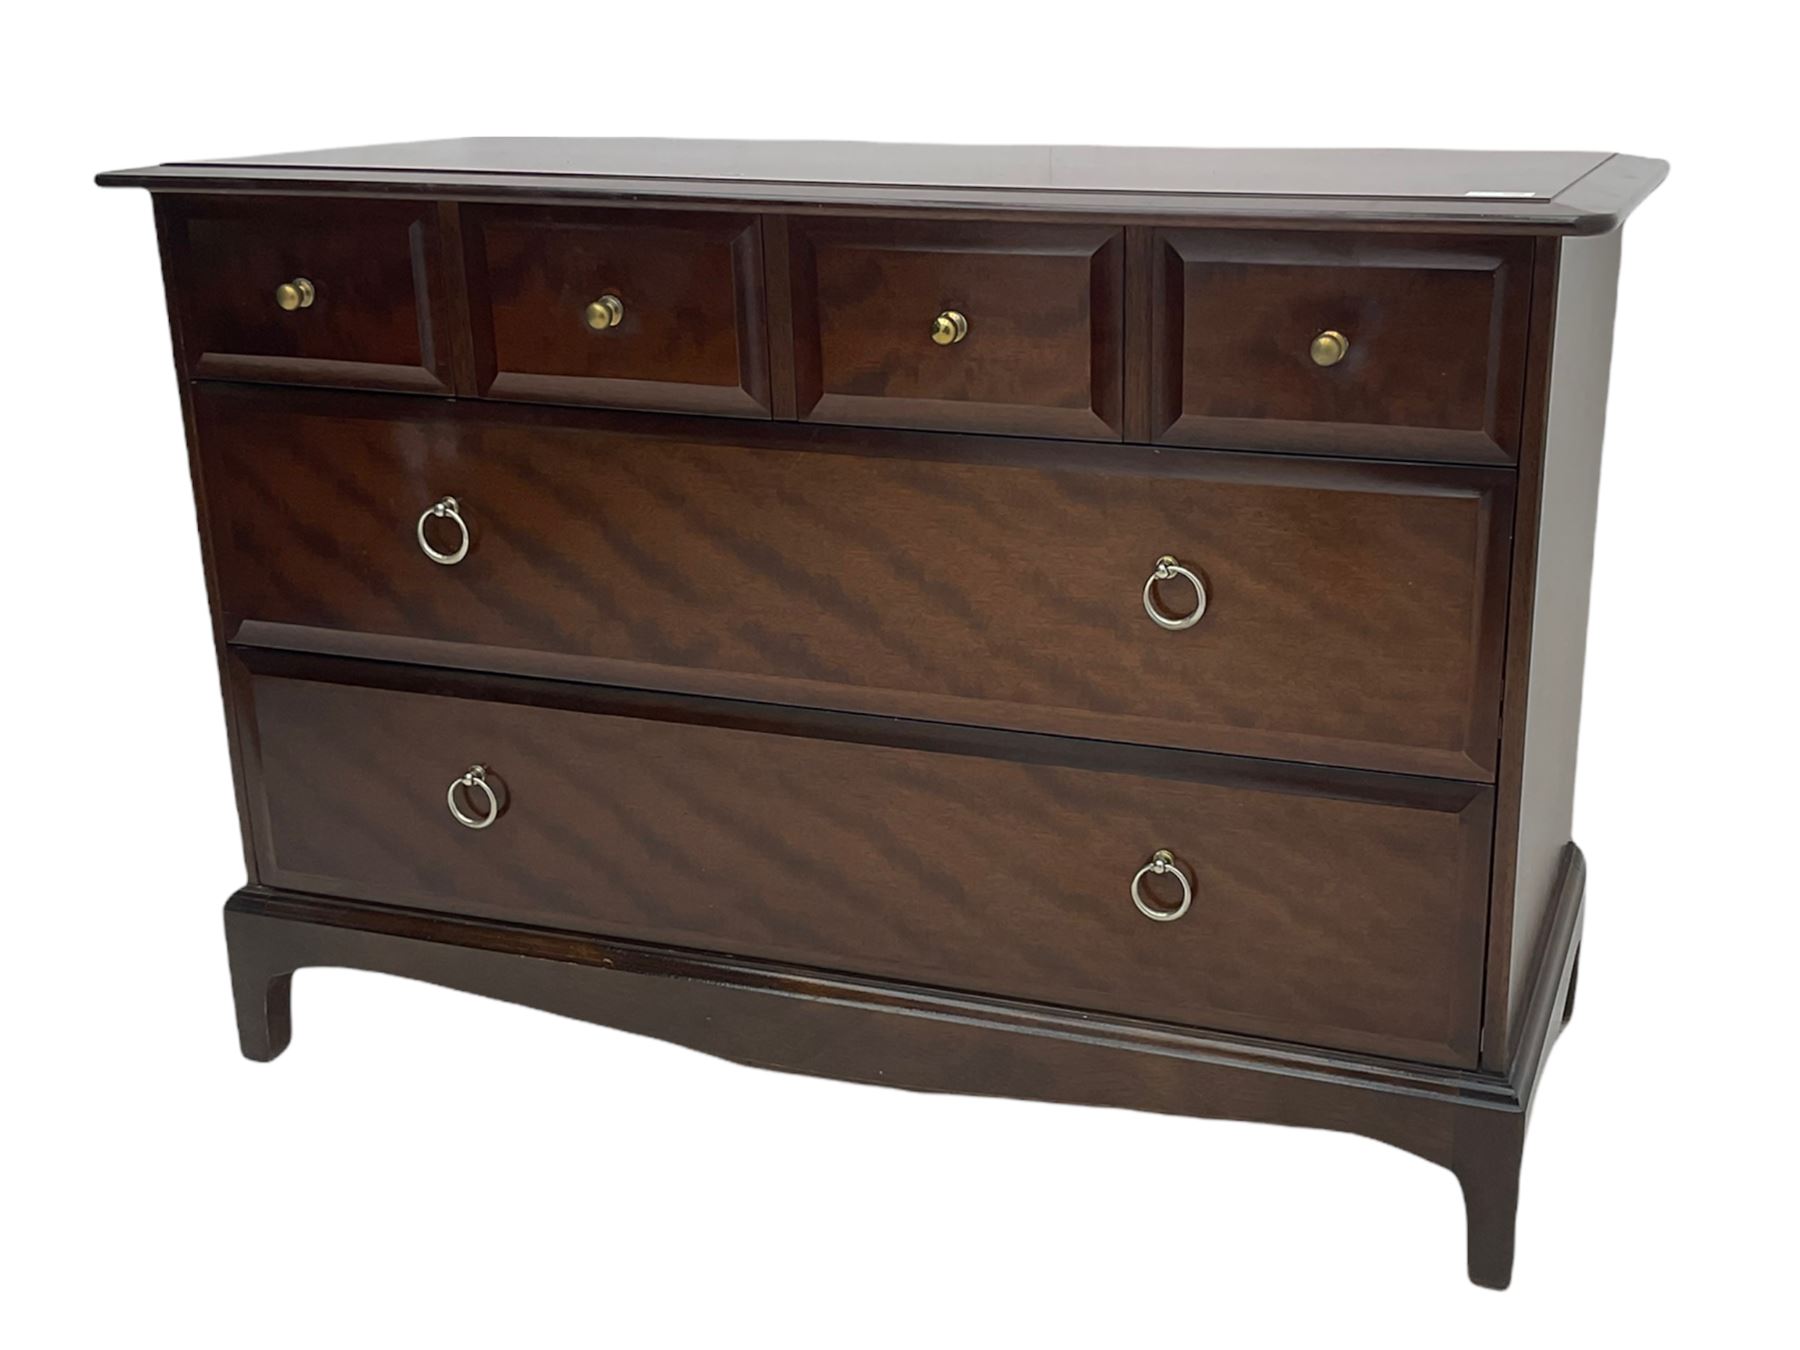 Stag Minstrel mahogany chest - Image 4 of 8